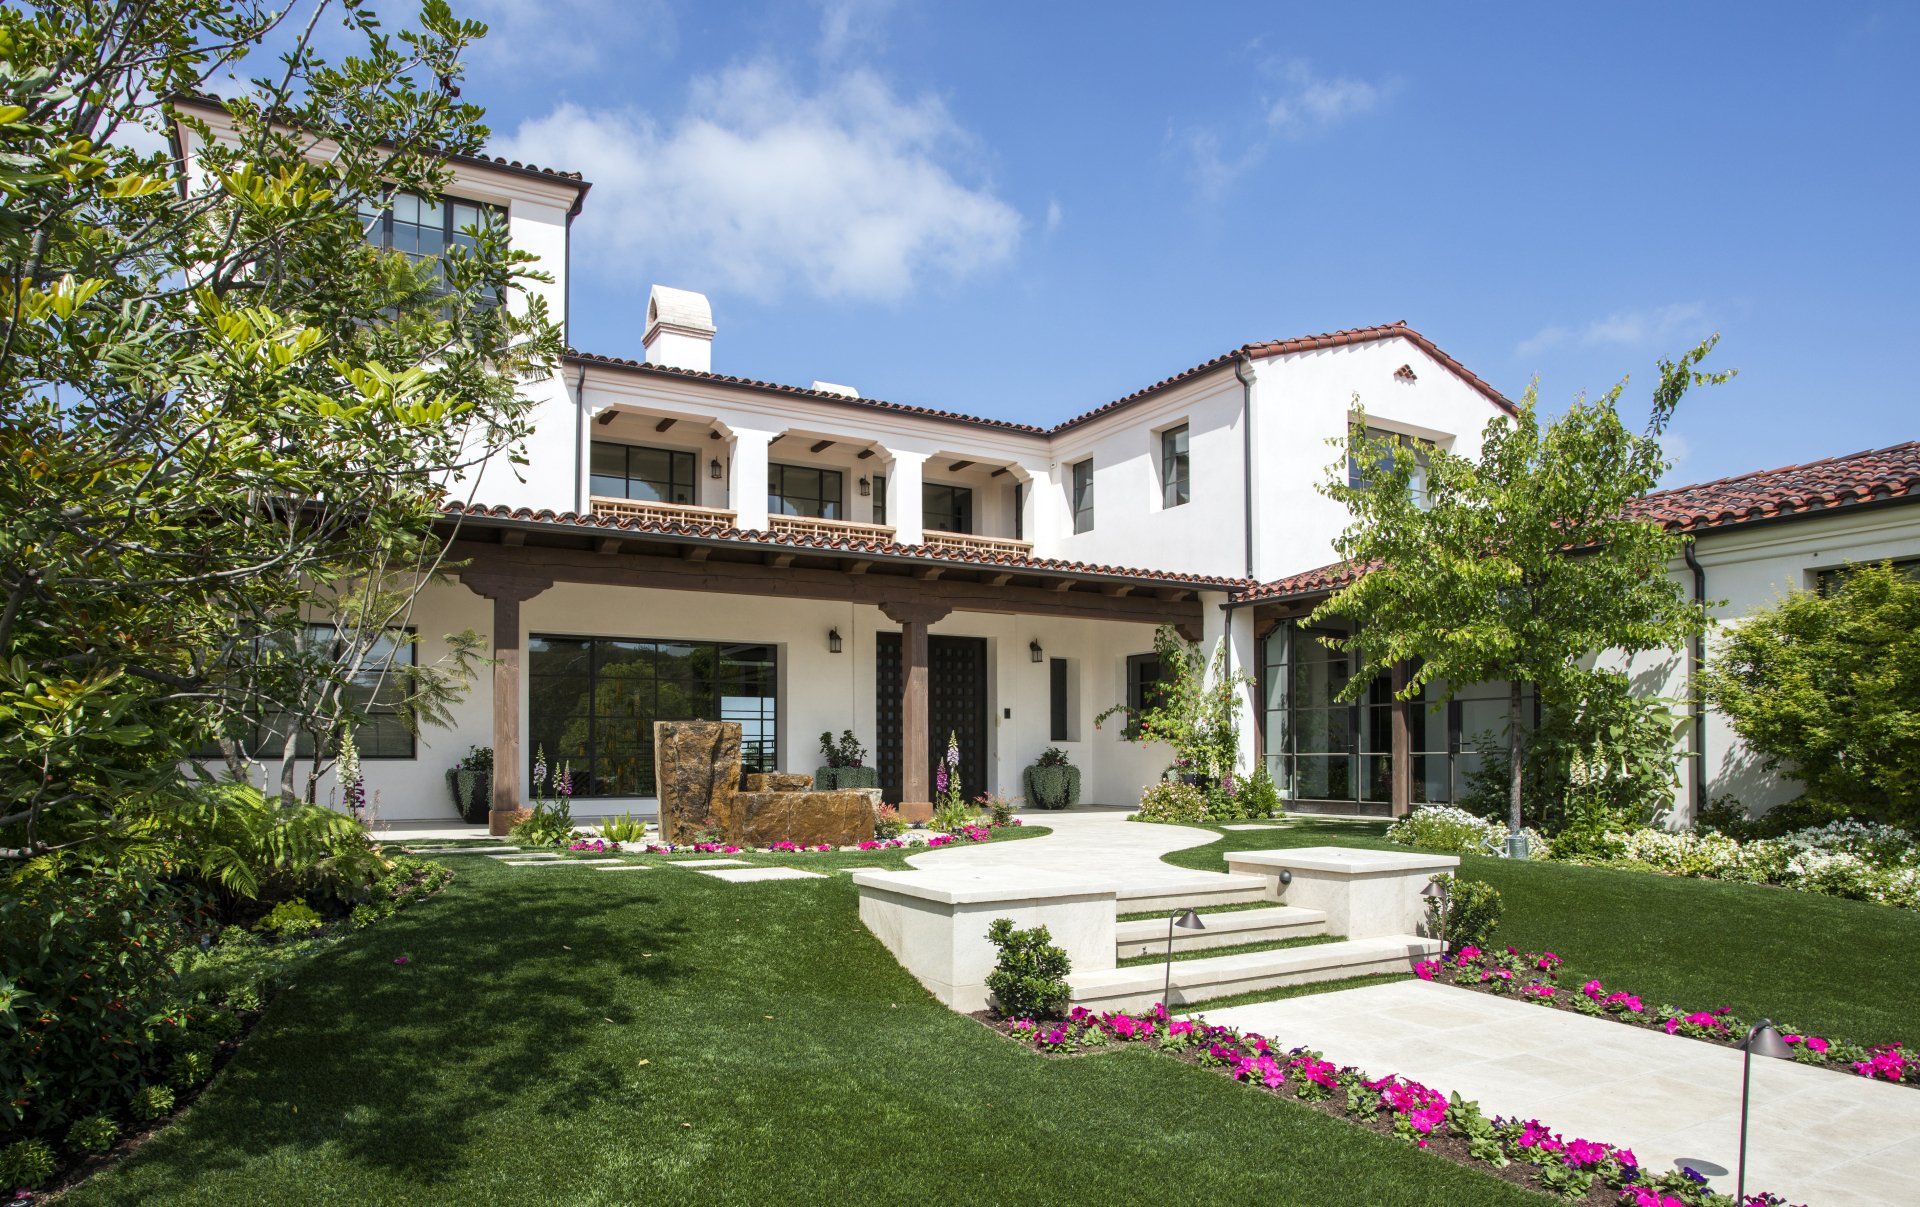 Exterior of a Santa Barbara style home in Irvine designed by Oatman Architects